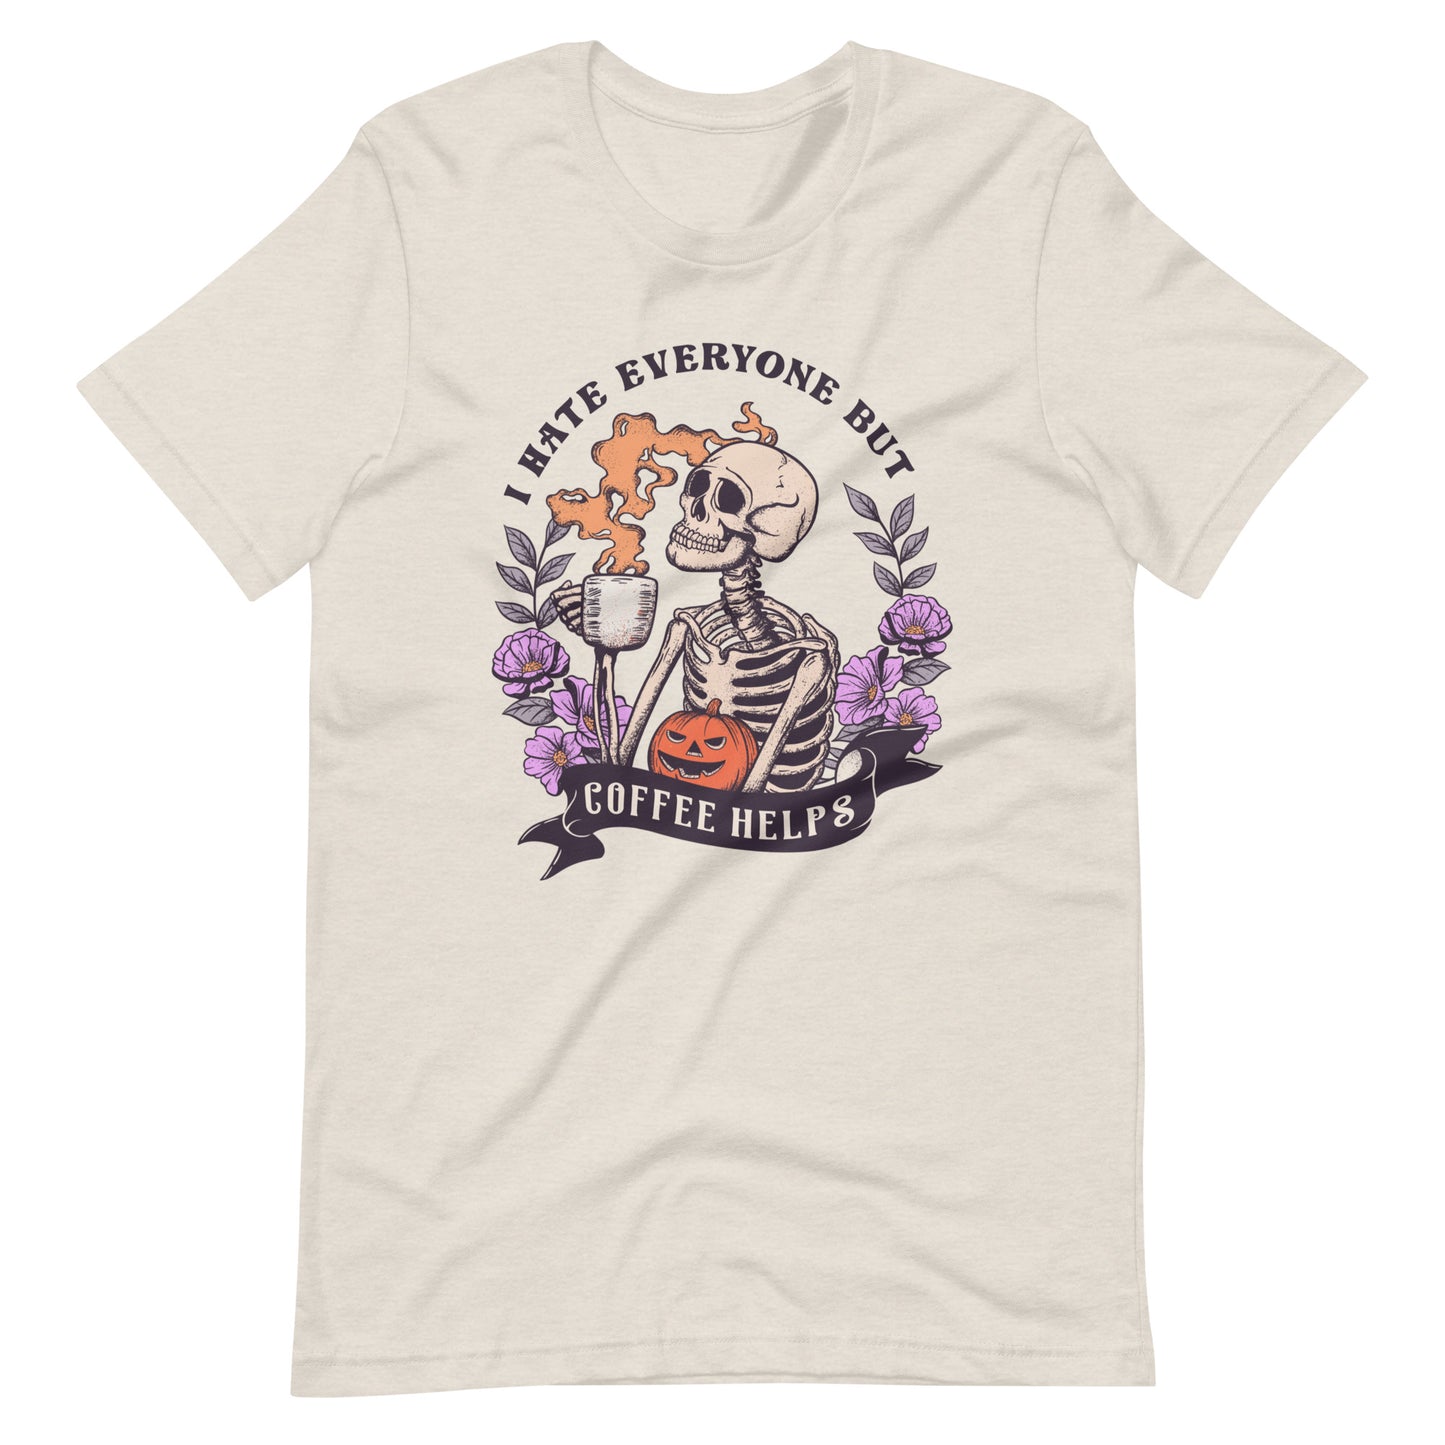 I hate everything but Coffee Helps Halloween Tee Unisex t-shirt